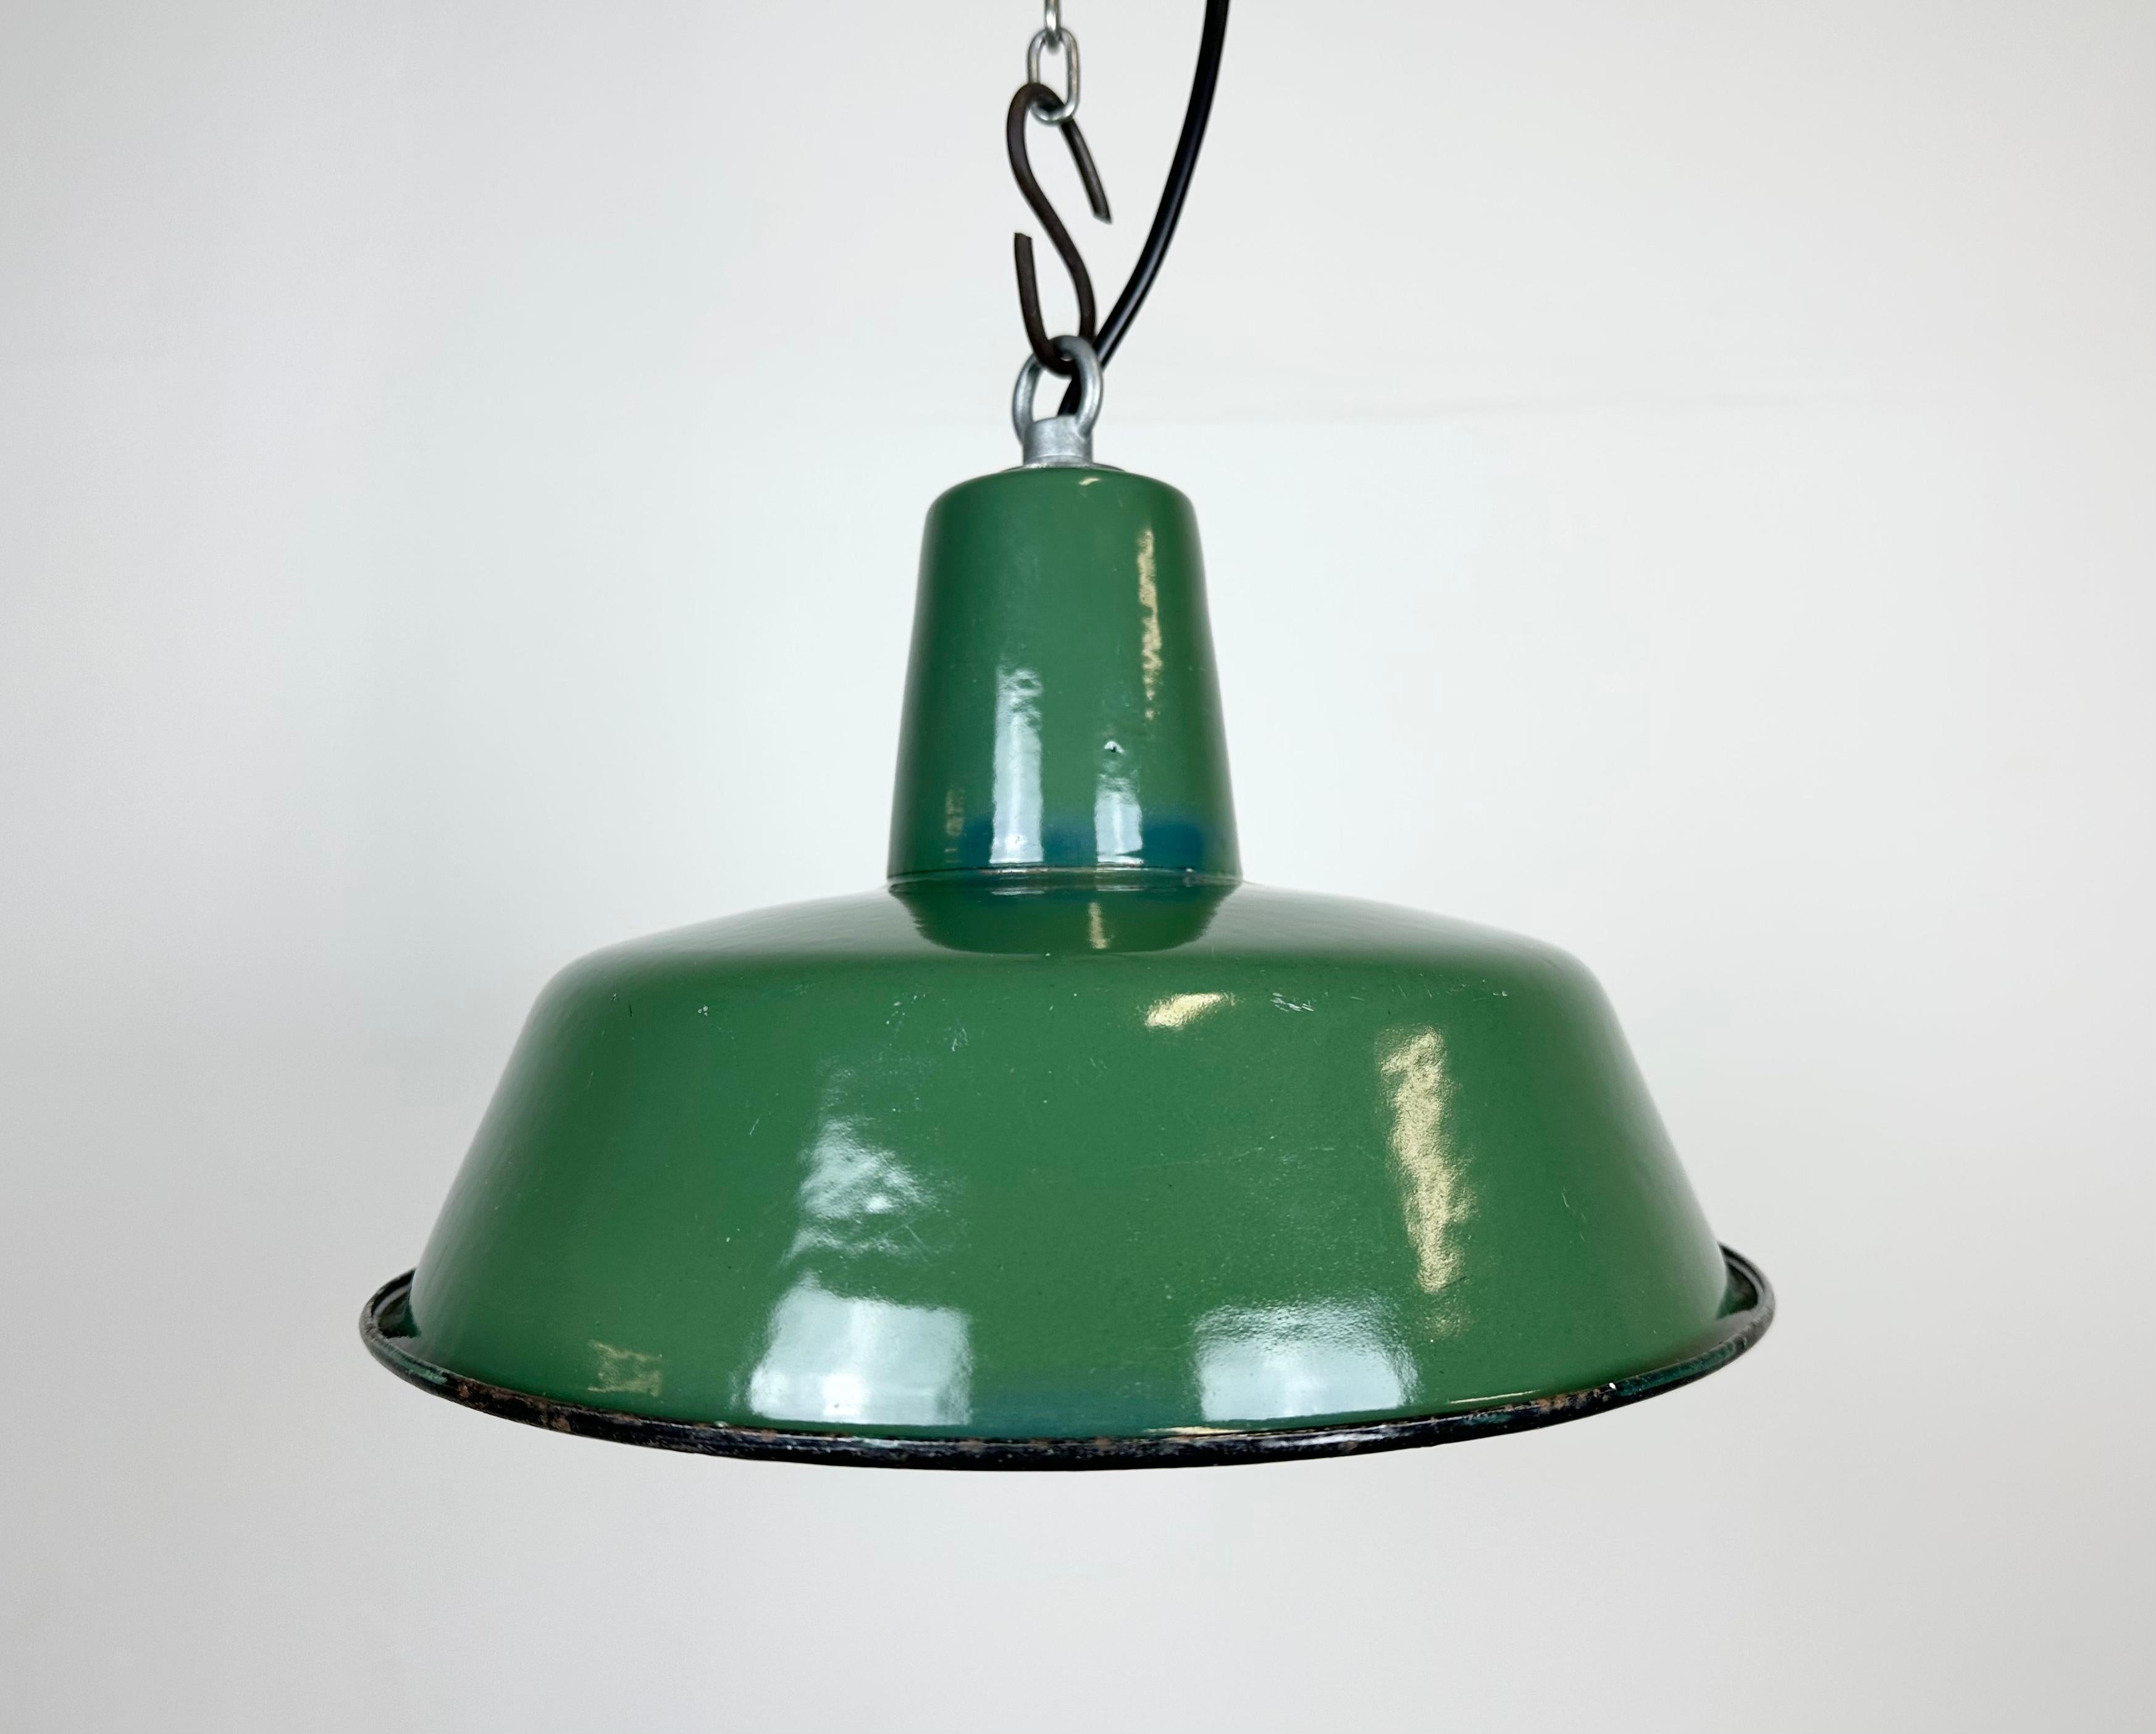 Industrial green enamel pendant light made in Poland during the 1960s. White enamel inside the shade. Iron top. The porcelain socket requires E 27/ E 26 light bulbs. New wire. Fully functional. The weight of the lamp is 0,8 kg.